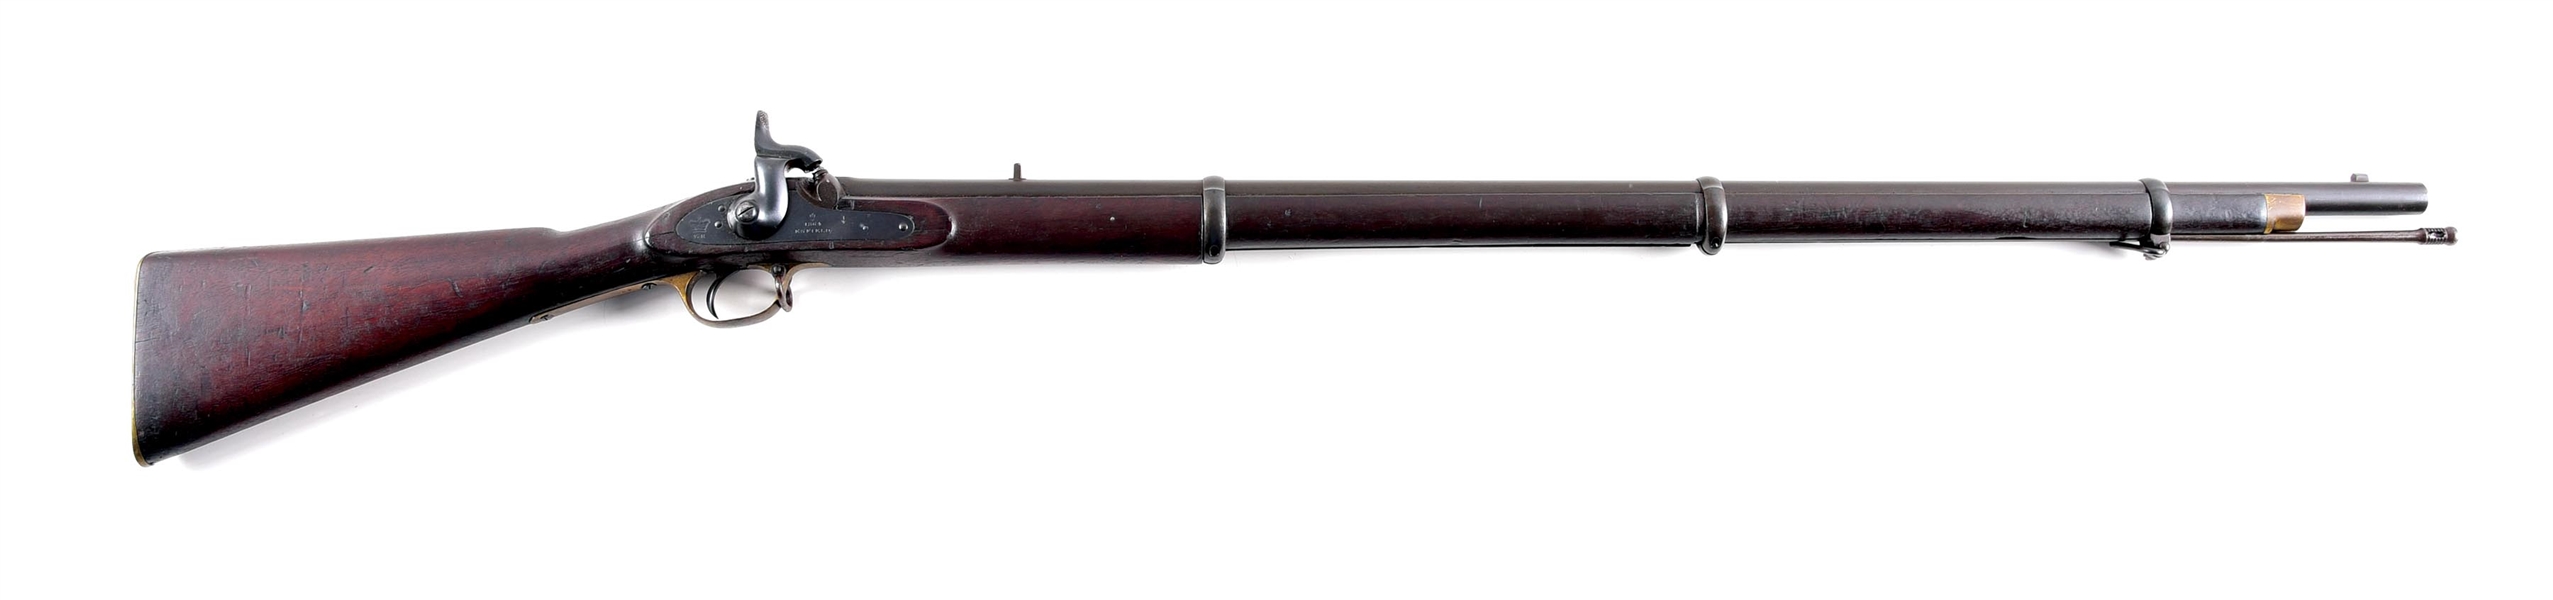 (A) ENFIELD PERCUSSION MUSKET DATED 1864.